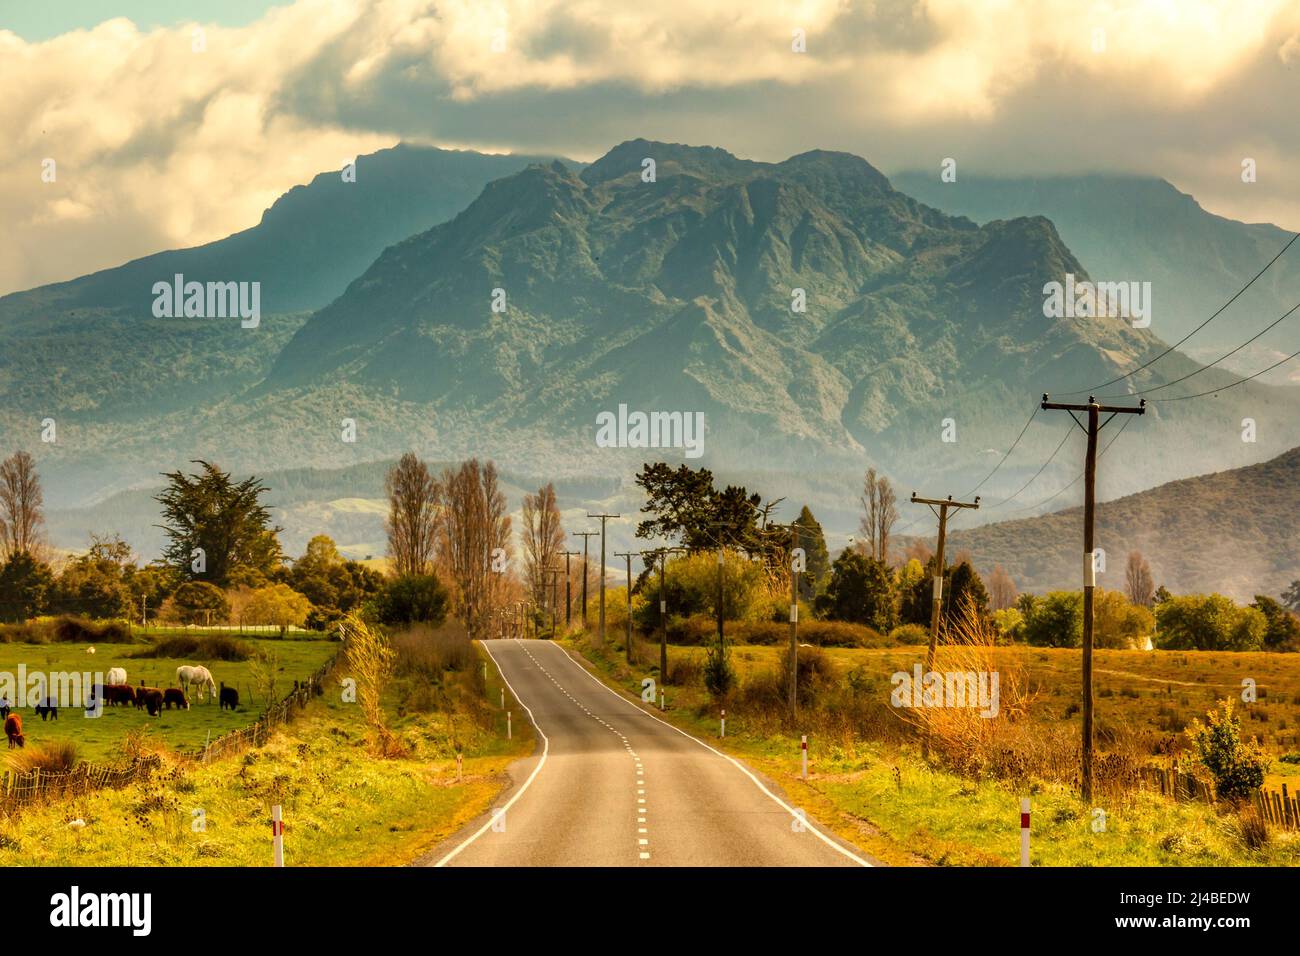 The rugged mountainous terrain of the remote rural wilderness of the far north of New Zealand Stock Photo